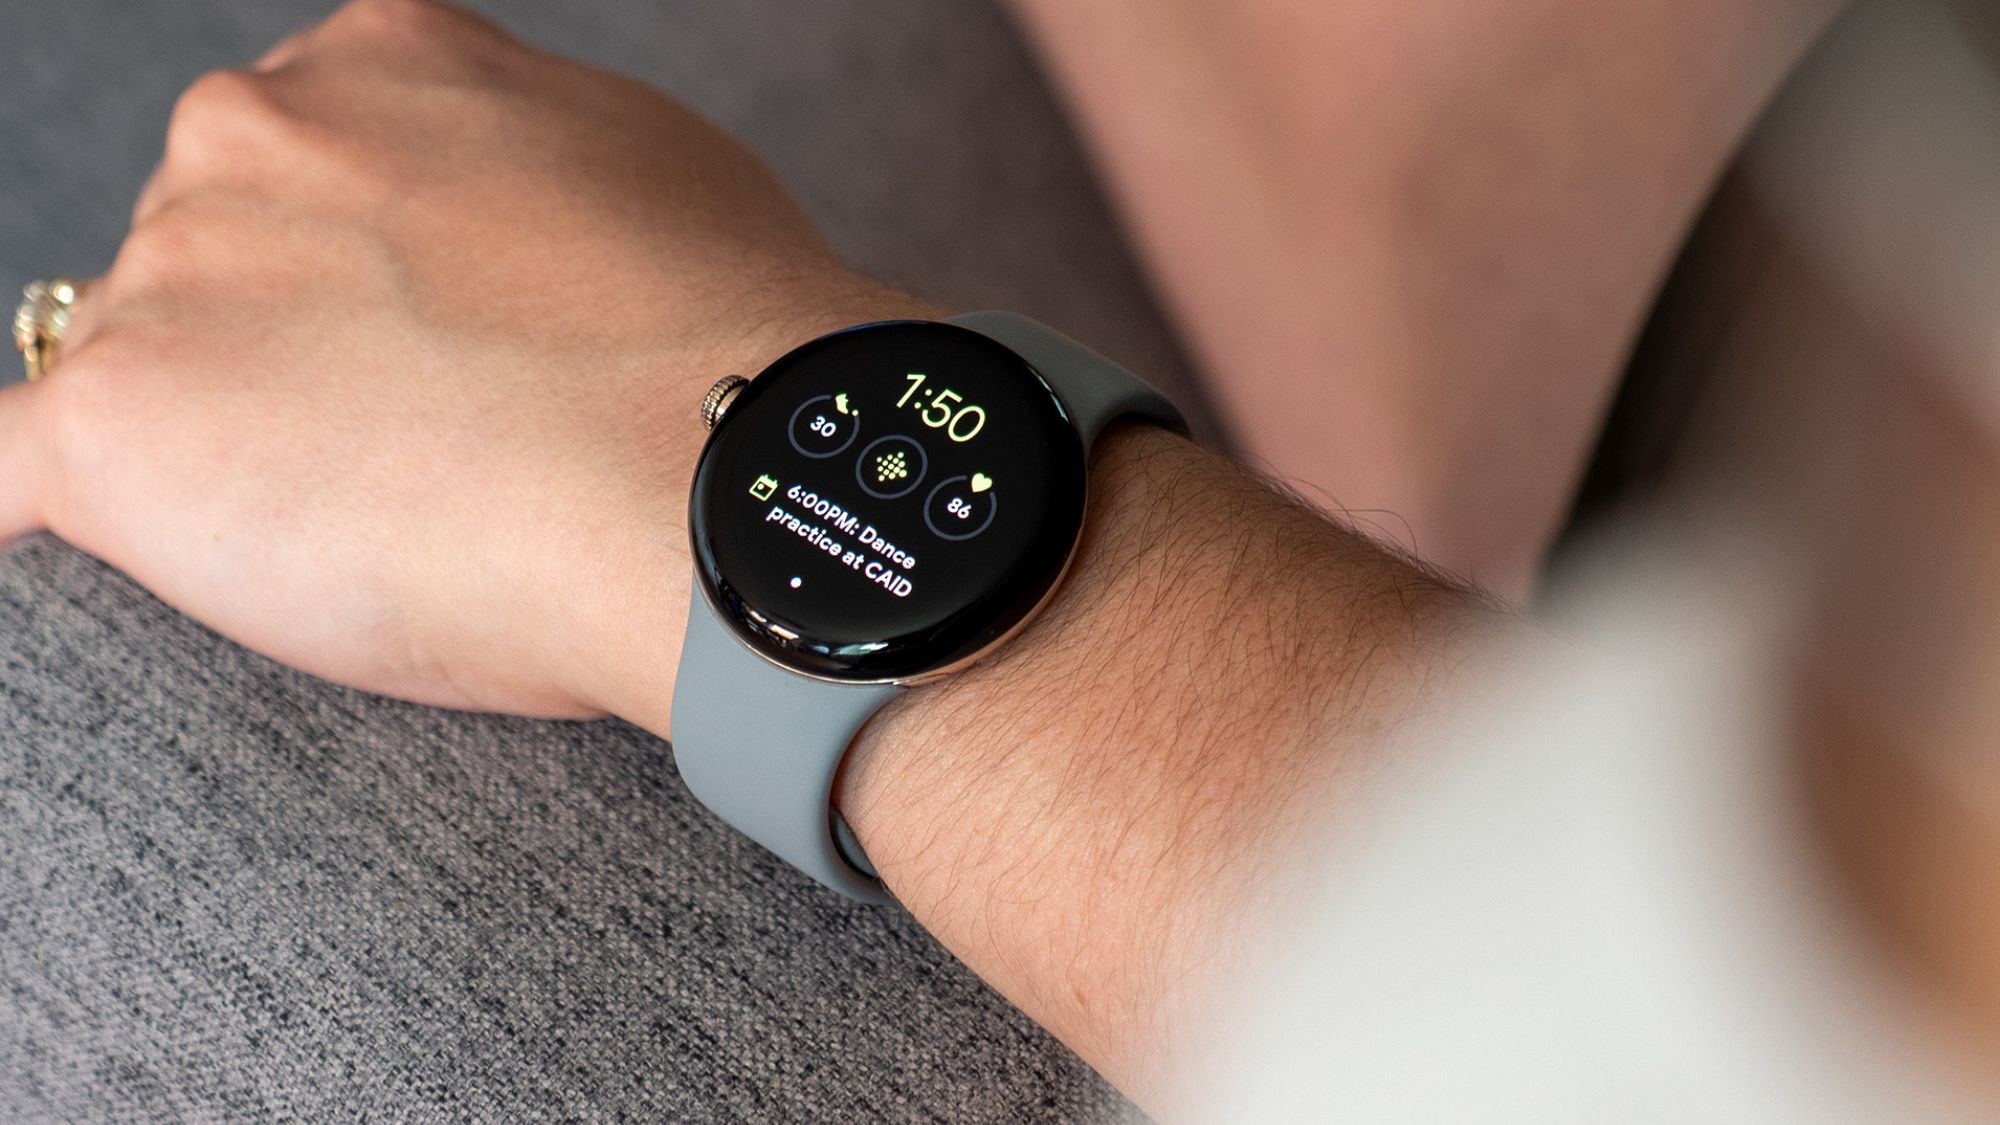 Toronto startup can turn your watch into a smartwatch